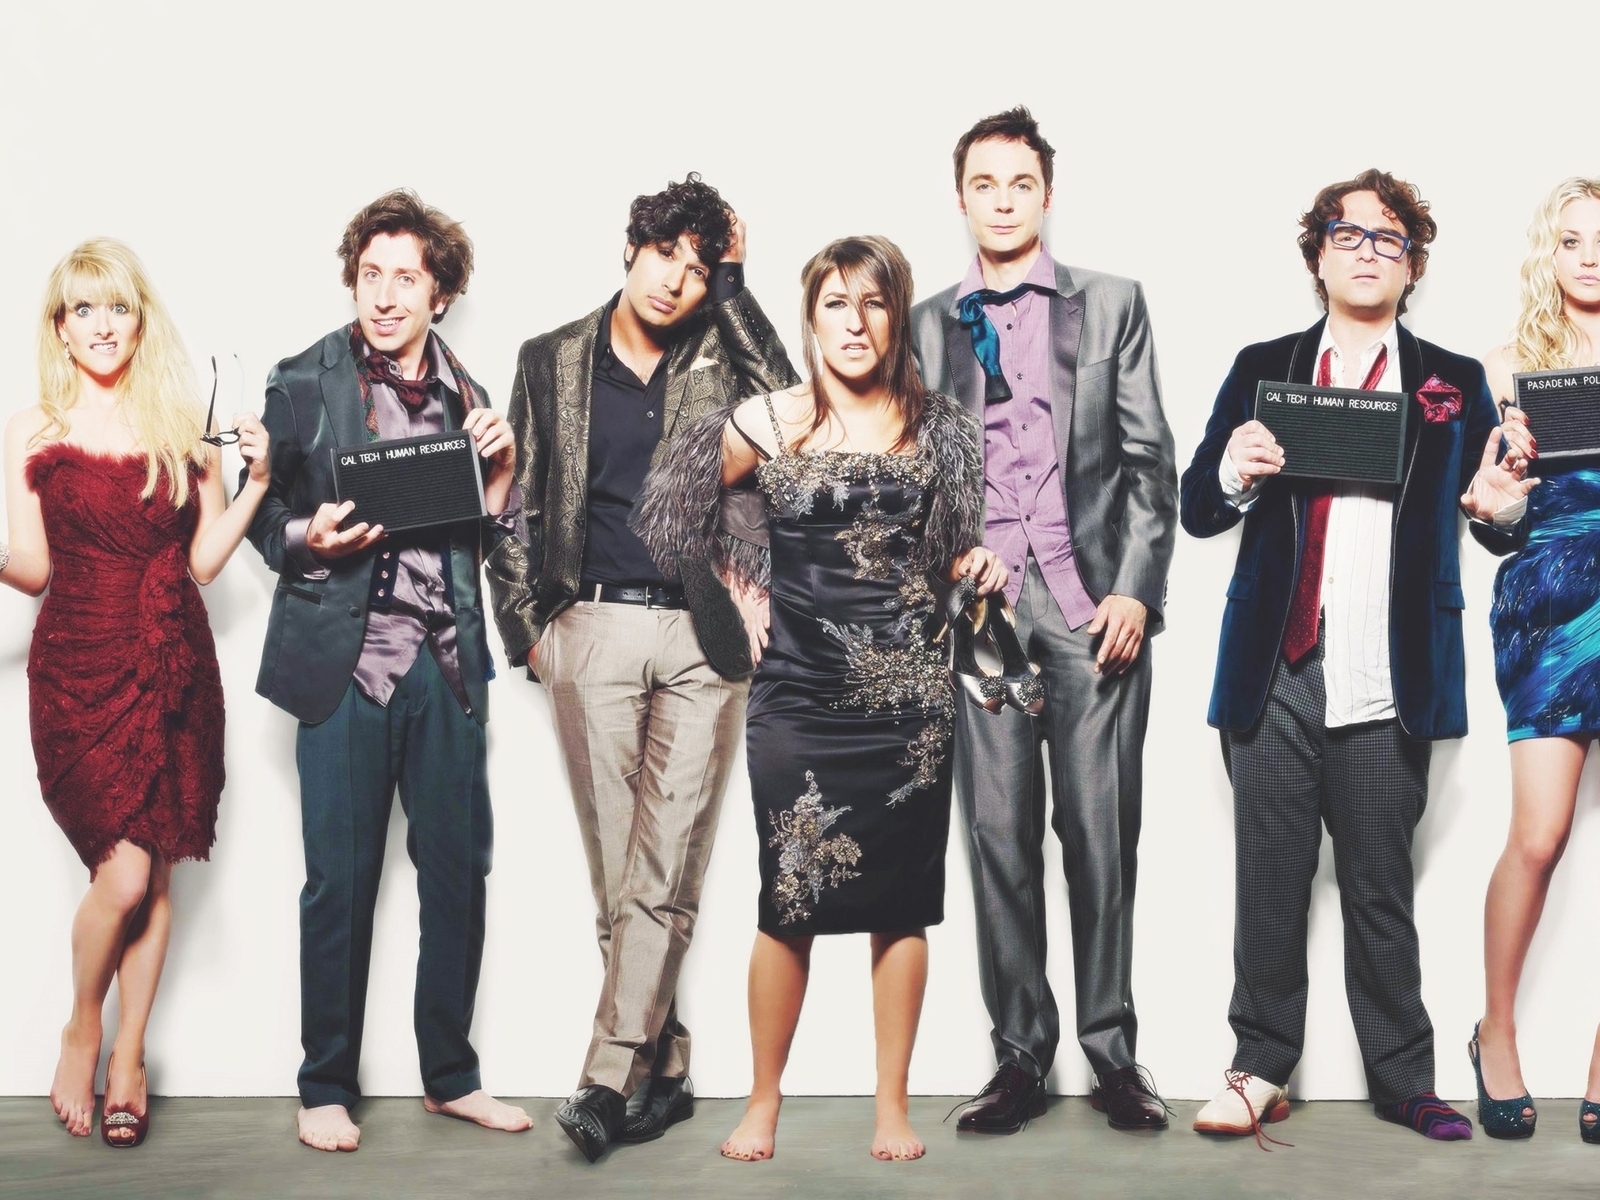 The Big Bang Theory Cast for 1600 x 1200 resolution